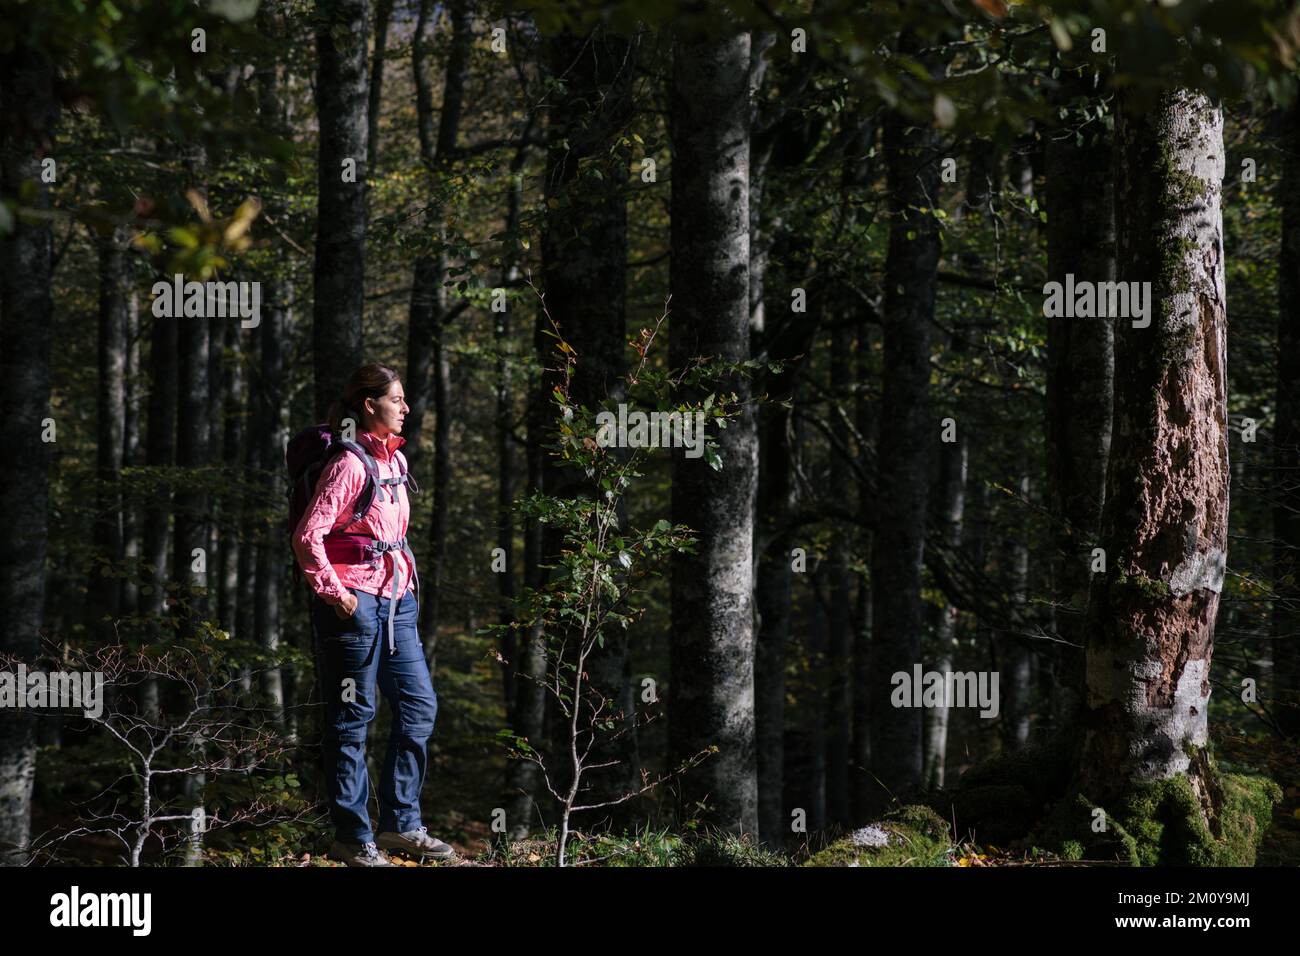 Hiker woman contemplating the forest landscape. Stock Photo